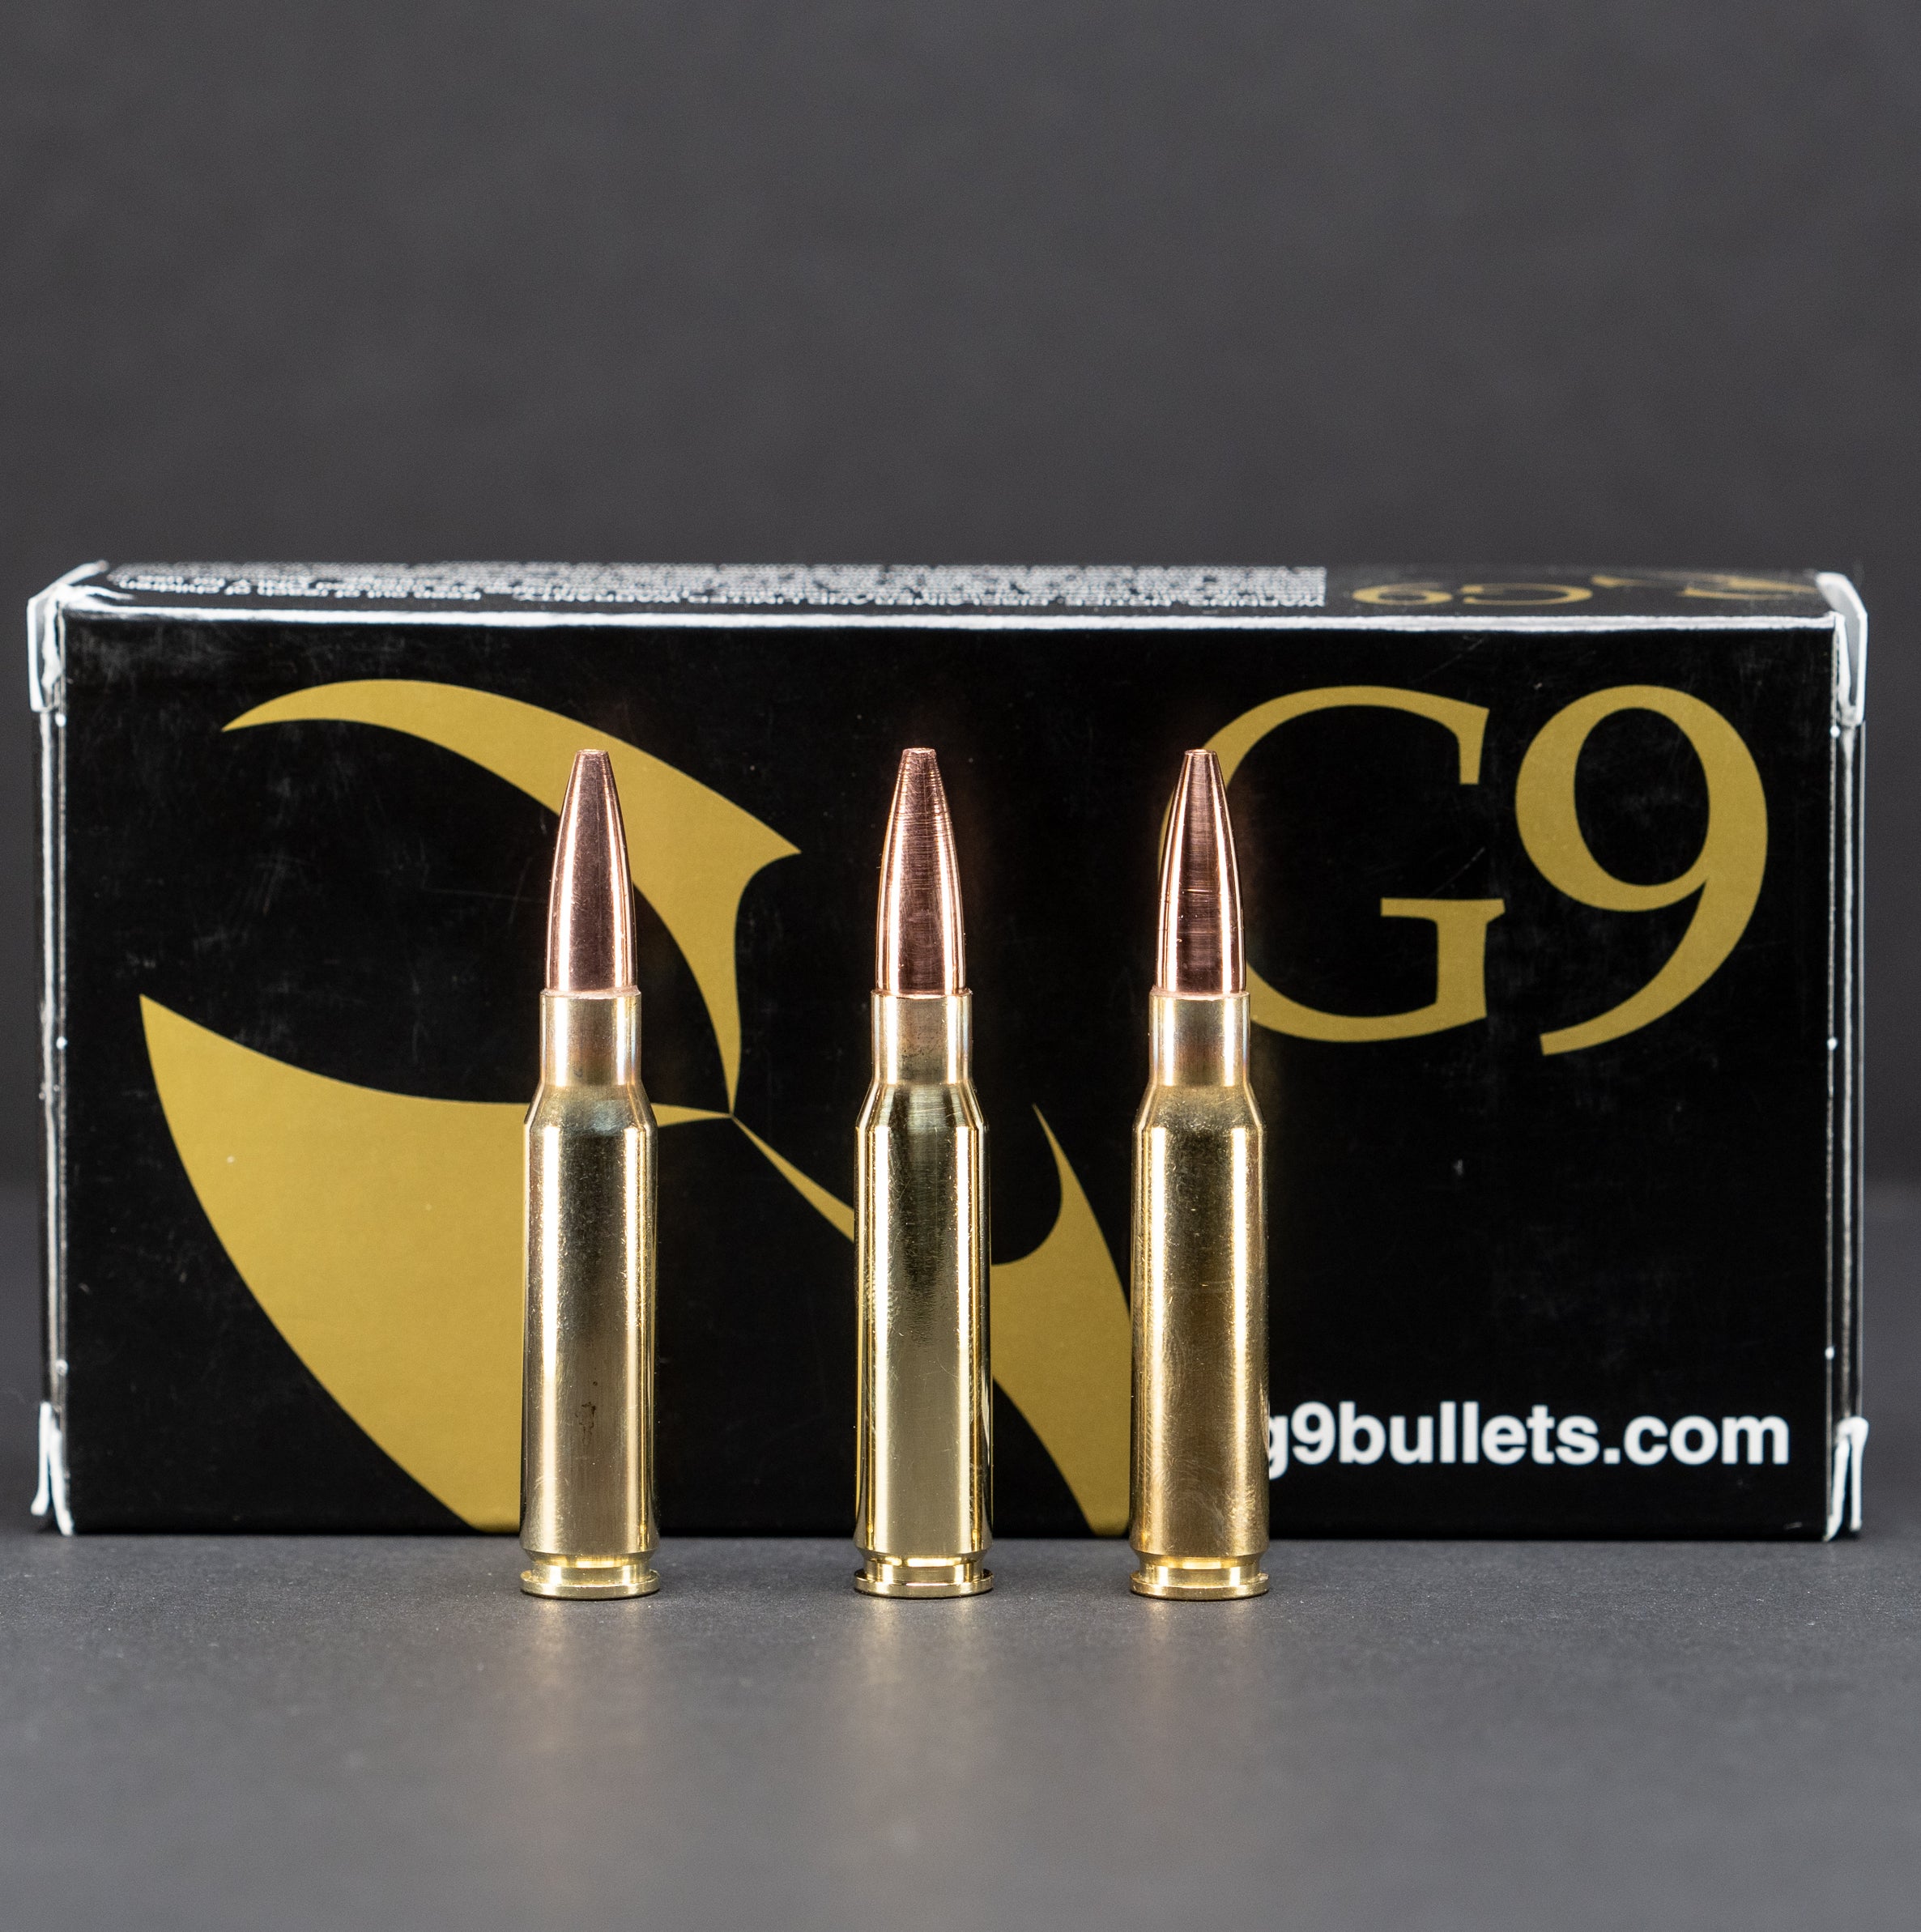 Solid Copper Performance - G9's New .308 Win Barrier Blind SCHP